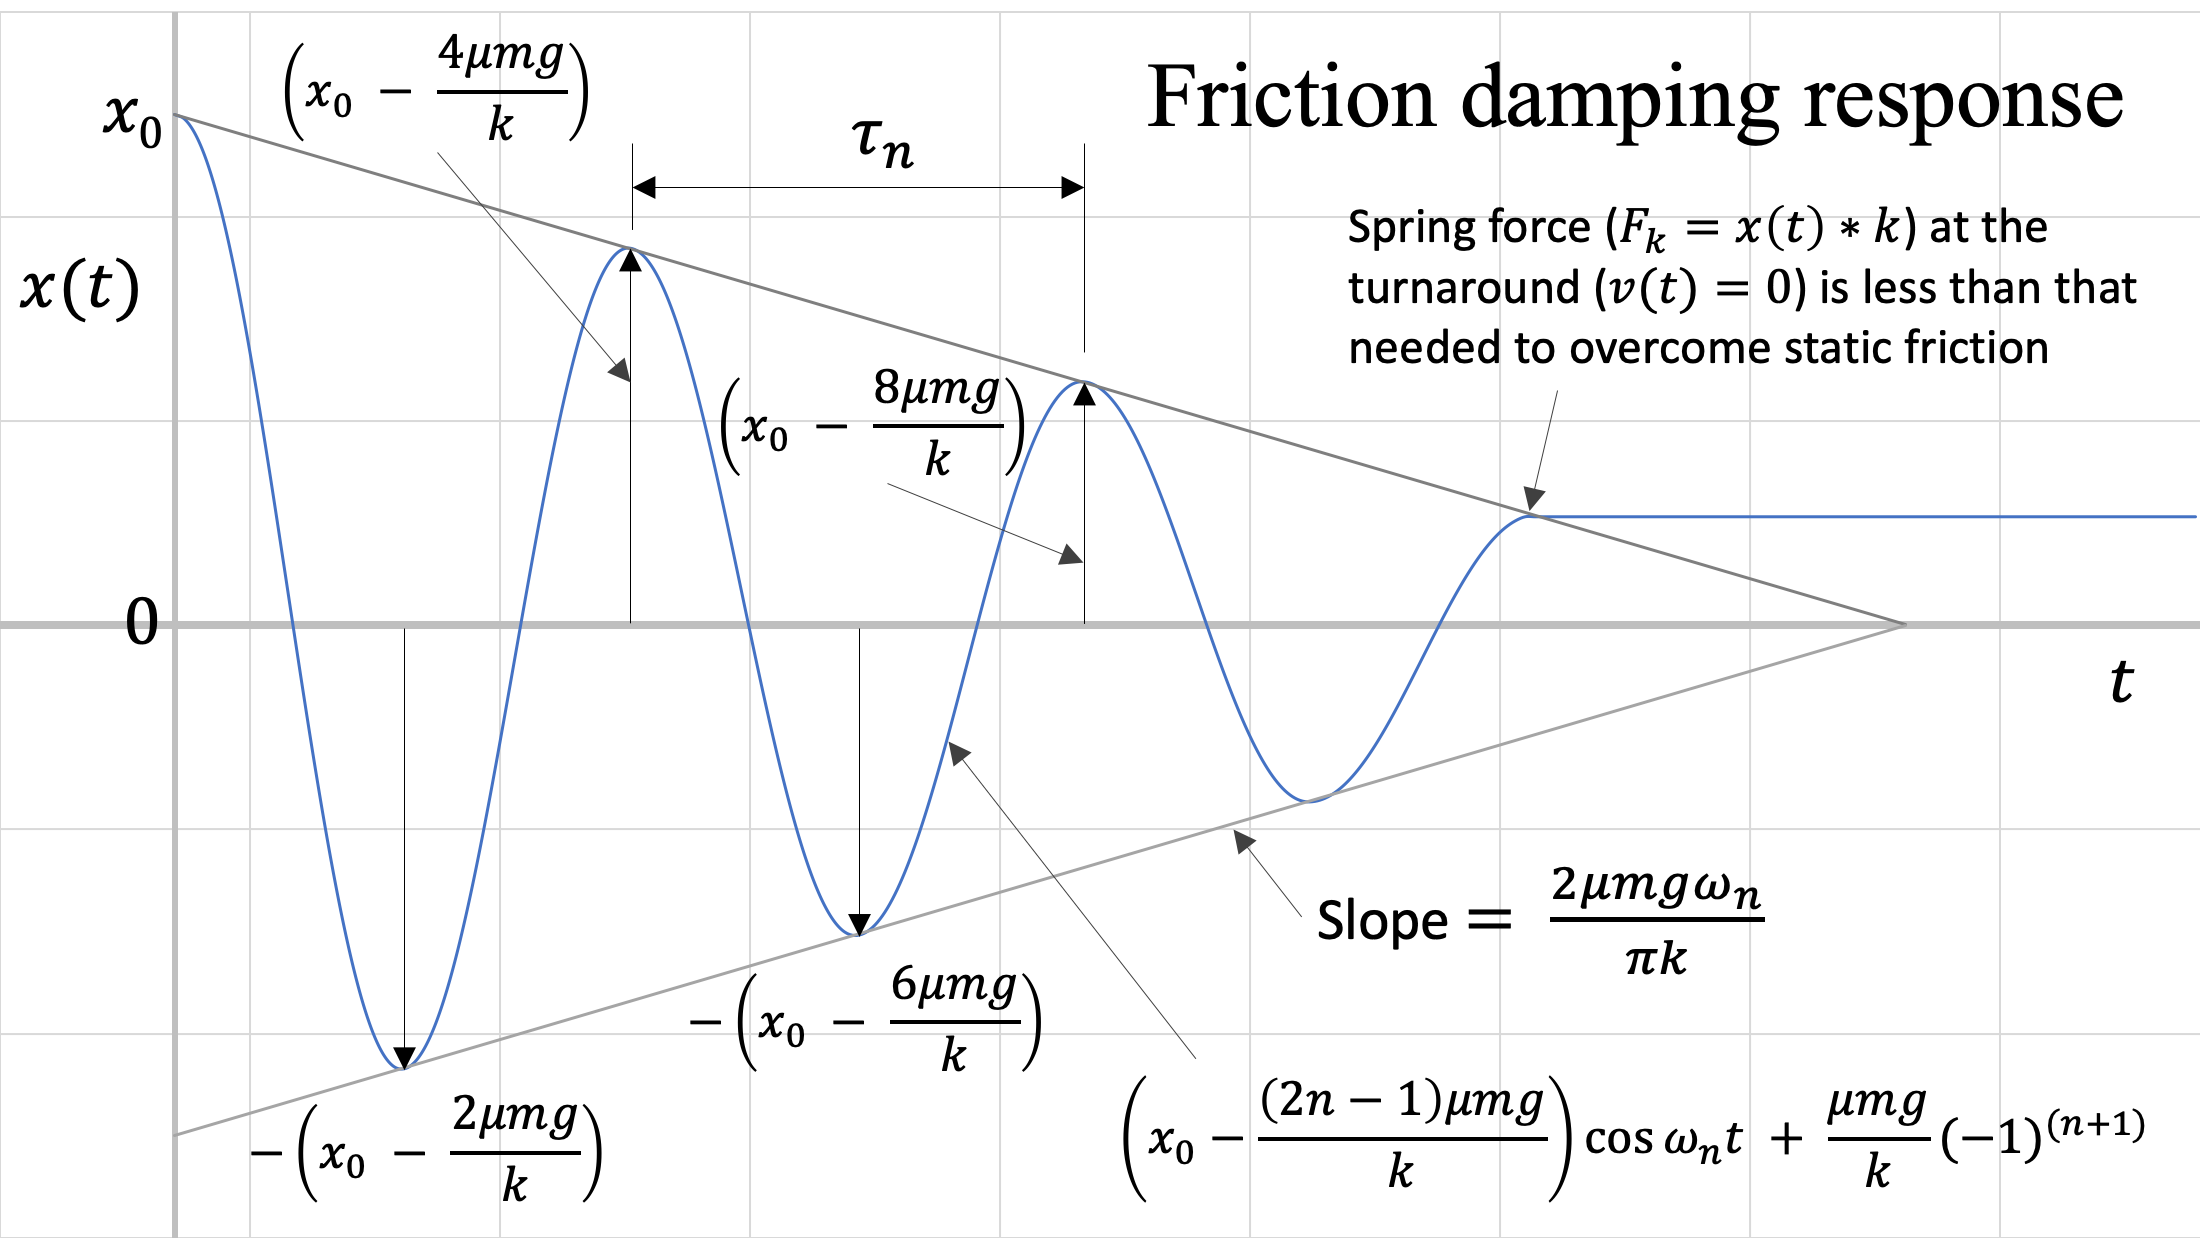 Graph of the friction damping response, with horizontal axis t and vertical axis x(t). At t = 0 the graph begins at a positive value of x(t), and it proceeds to oscillate about the t-axis with the amplitude gradually decreasing. Eventually, at one of the graph peaks/turnaround points, the spring force of x(t)*k is less than the value needed to overcome the static friction and the position x(t) no longer changes over time.